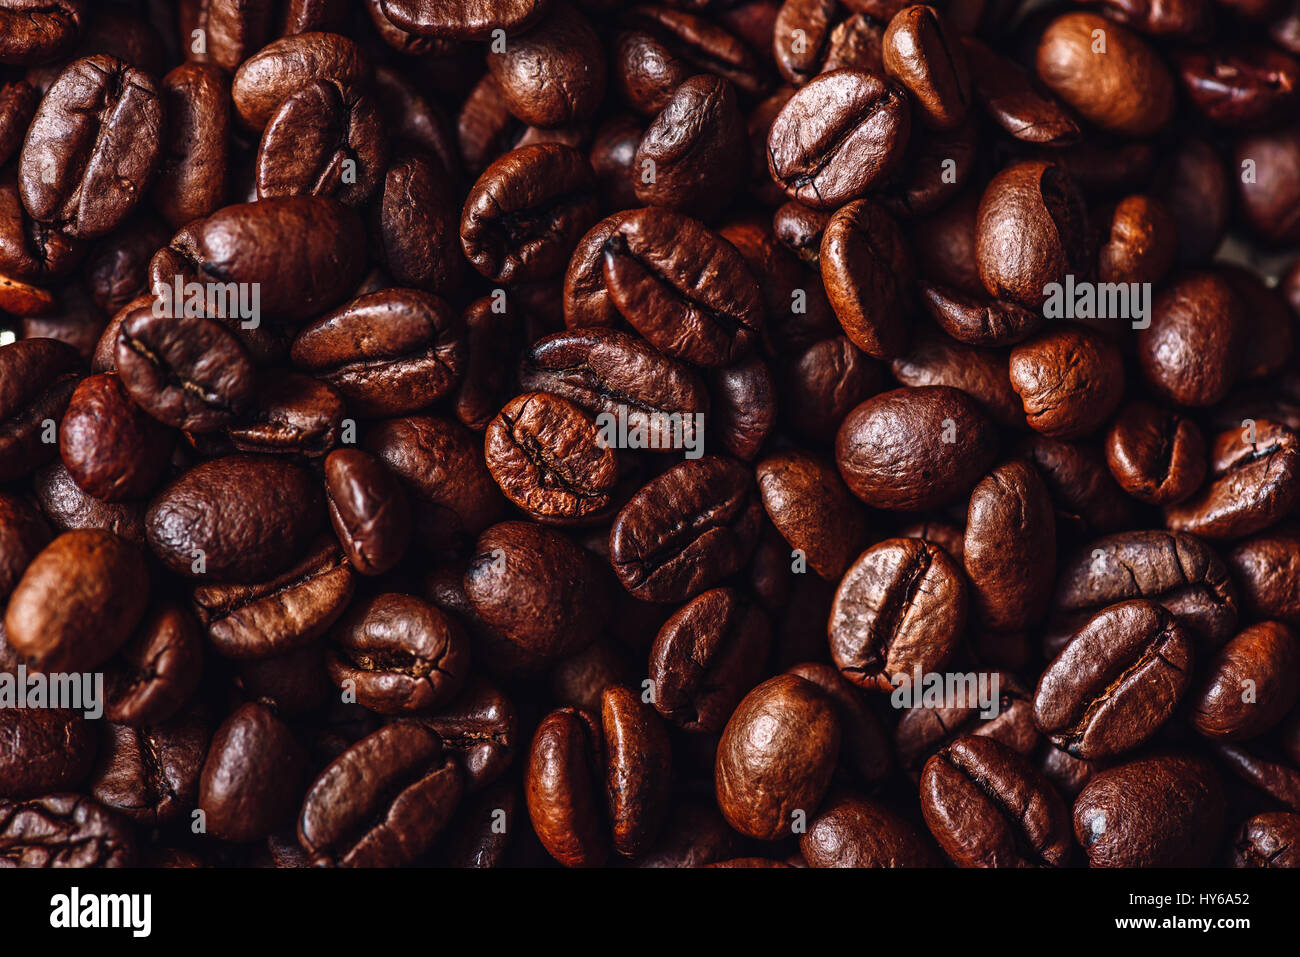 Background of Brown Coffee Beans. Copy Space Stock Photo